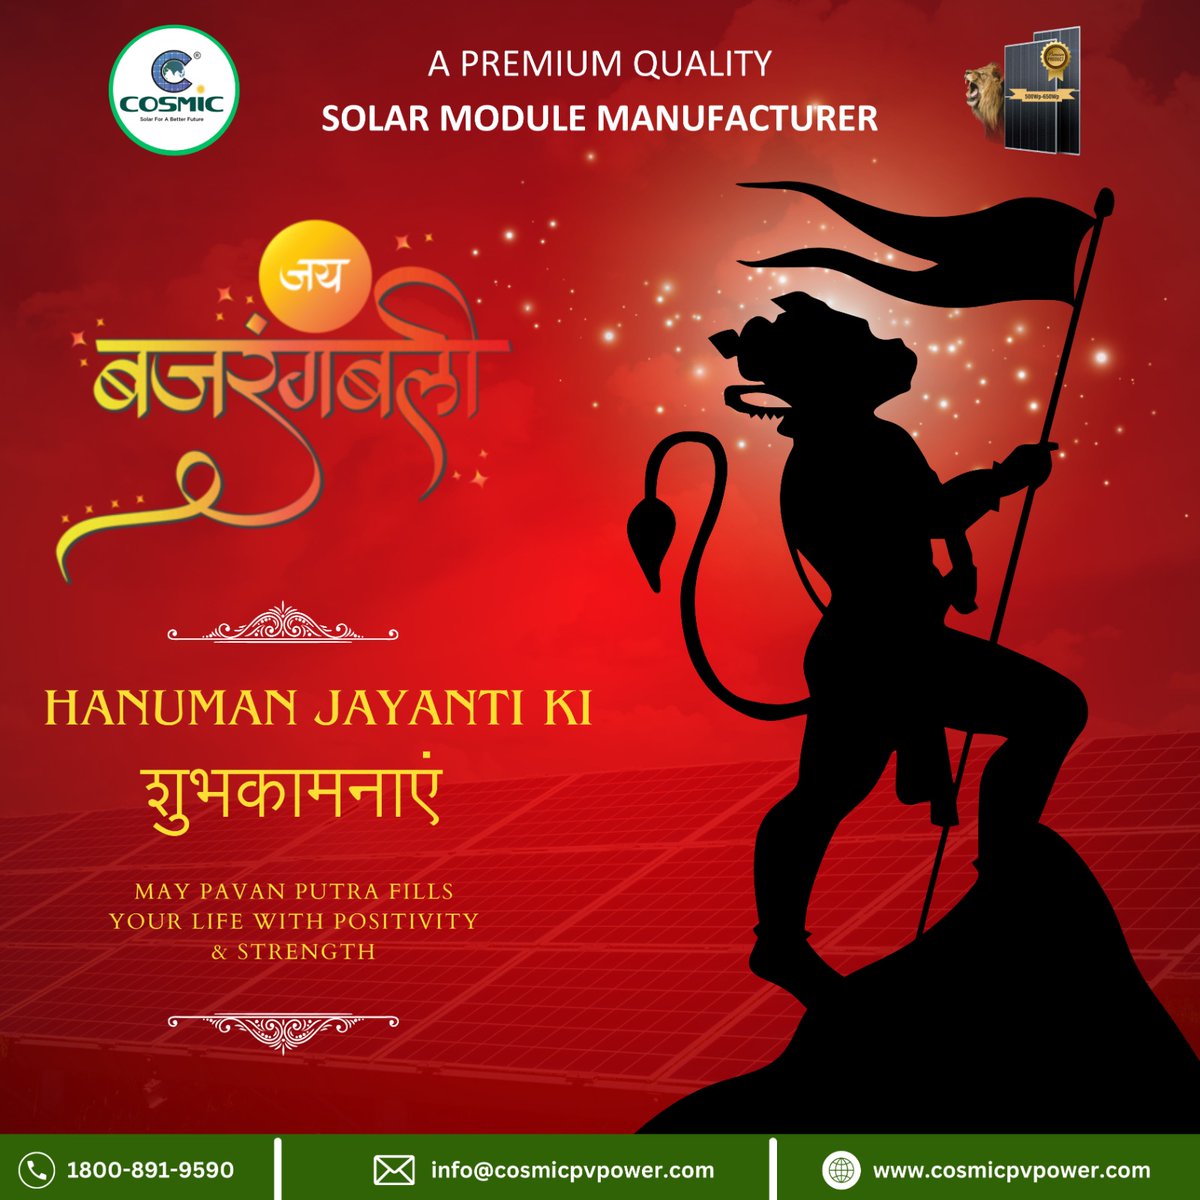 जय बजरंगबली !!! On this auspicious day of Hanuman Jayanti may Lord Hanuman bless you with good health, wealth, happiness, and also strength to succeed. #CosmicPVPower wishes you all a very Happy Hanuman Jayanti…. #HanumanJayanti #HanumanJayanti2021 #Spiritual #bajrangbali